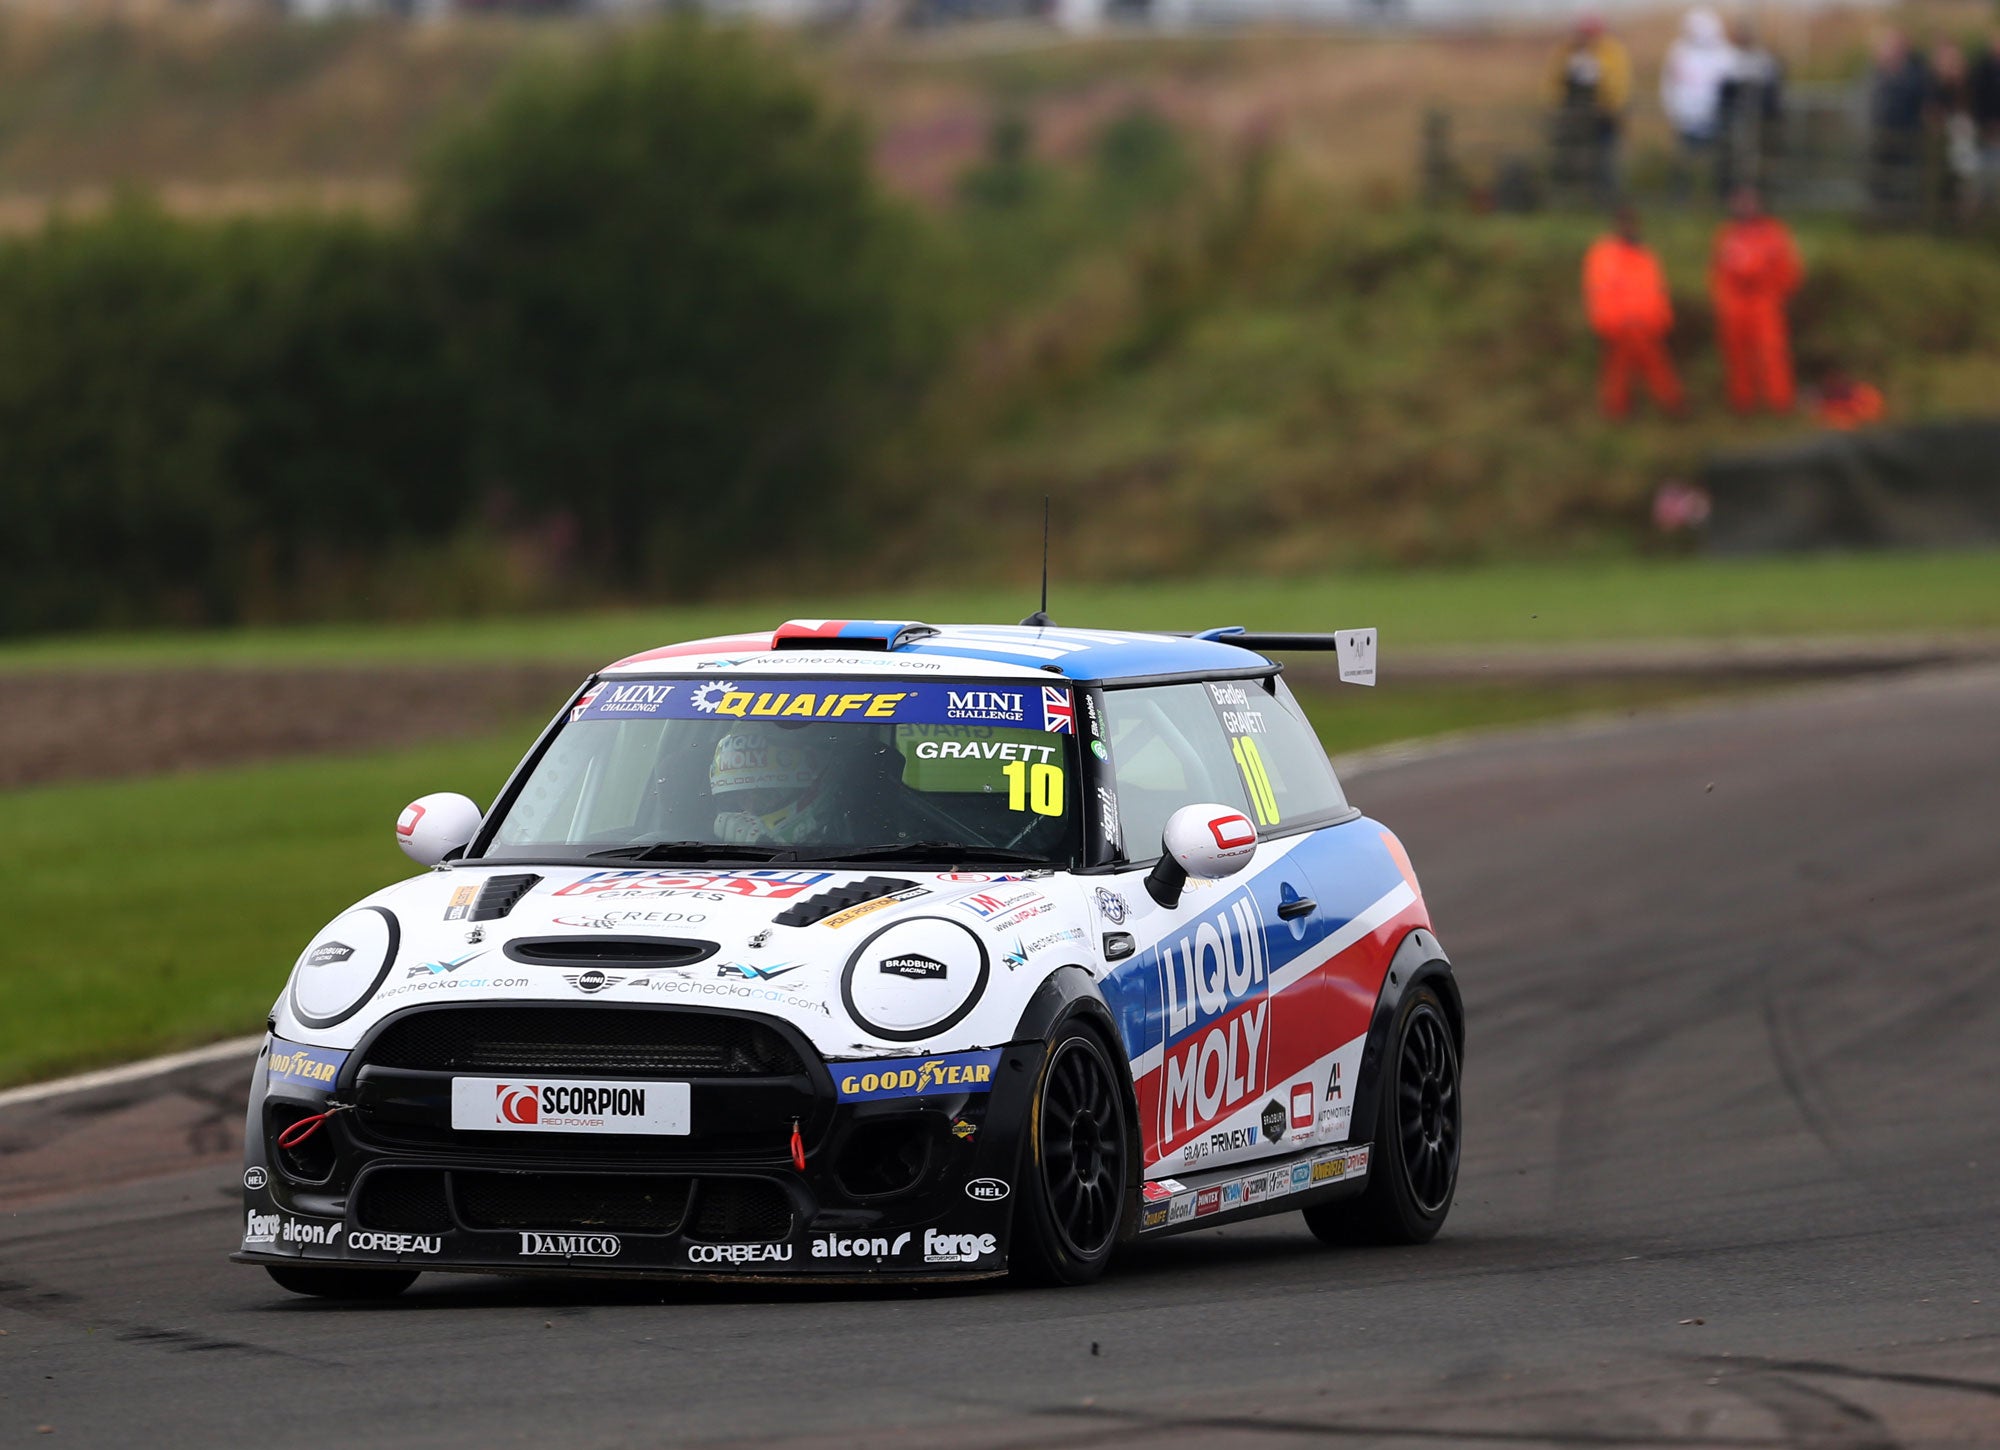 Bradley Gravett son of BTCC British Touring Car Champion Robb Gravett in the MINI Challenge JCW Series at Knockhill in 2021 Turning Right on Track Graves Motorsport Cooper Racing Driver LIQUI MOLY LM Performance Thinking it Better